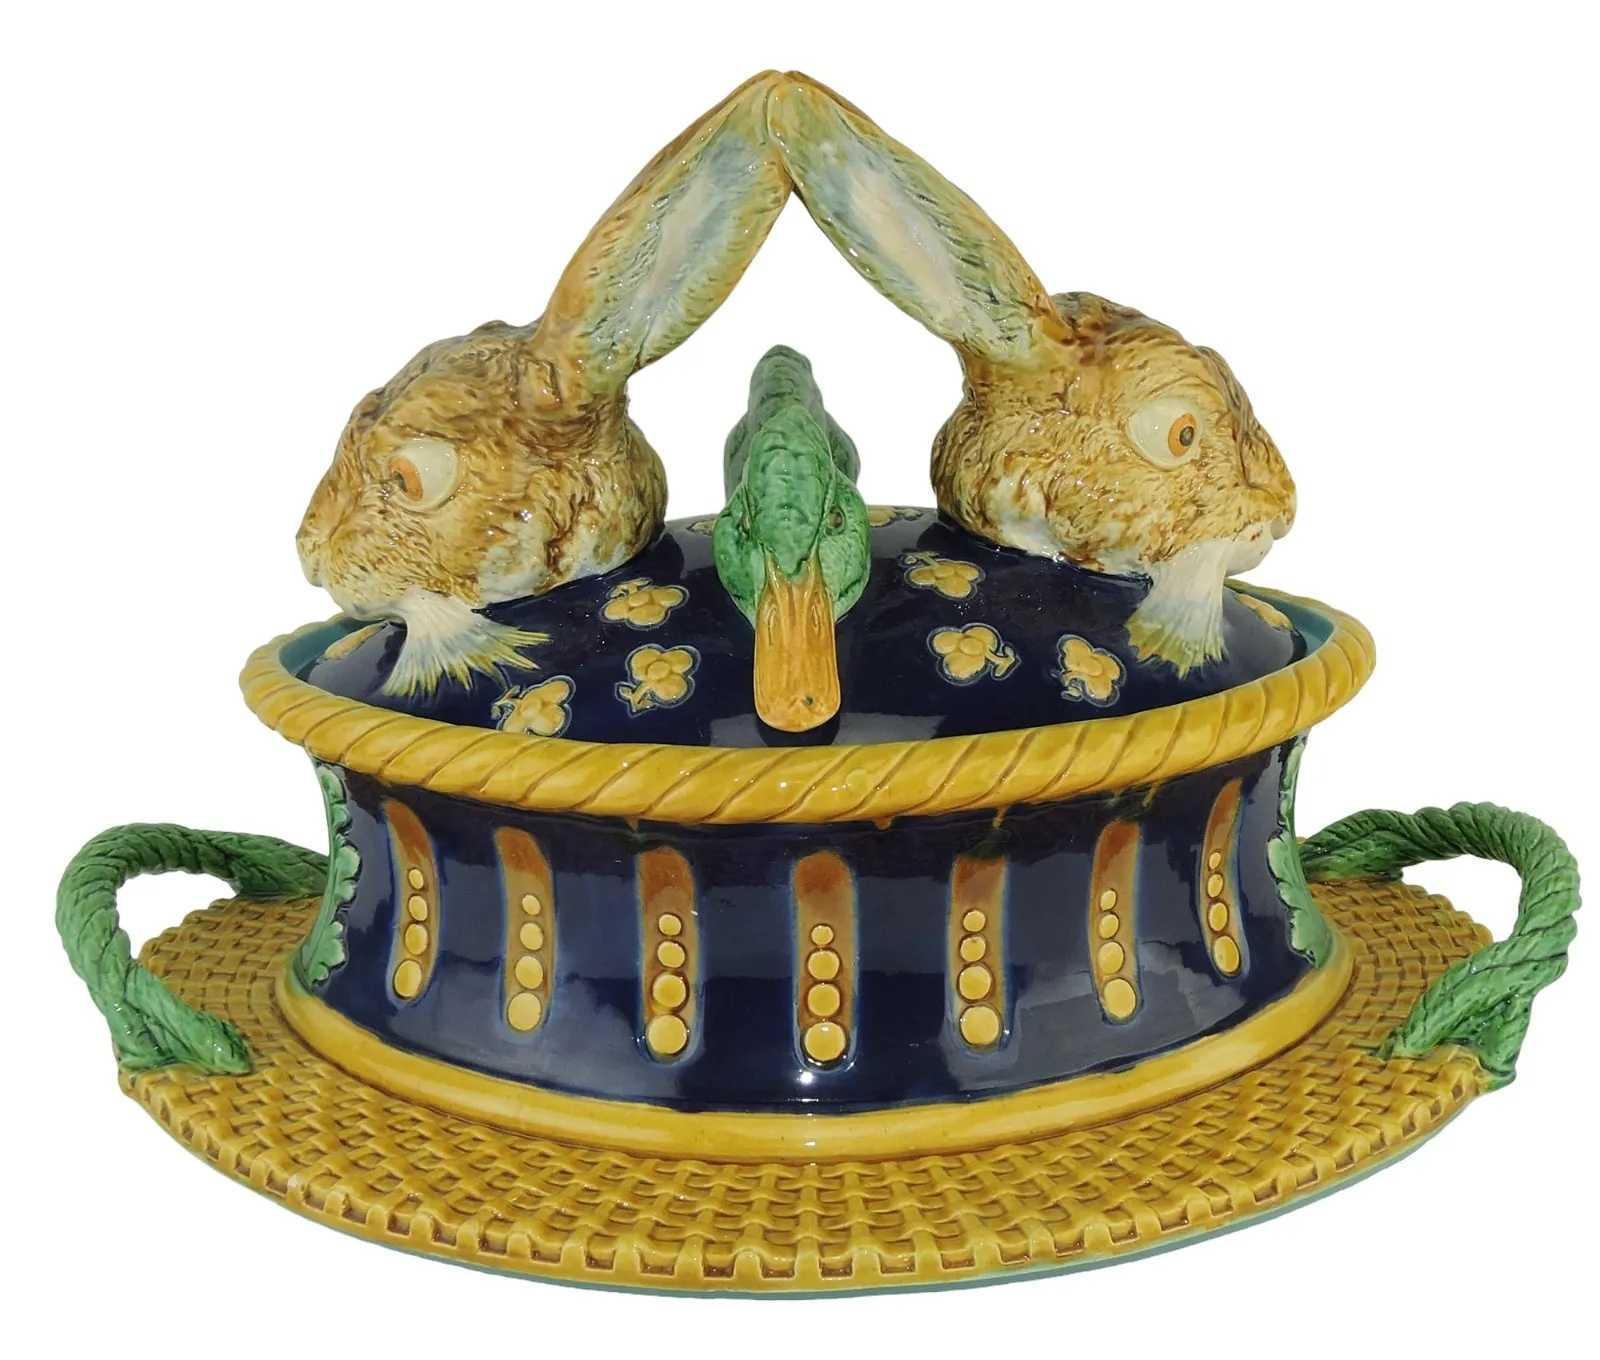 Mintons Majolica Hare and Duck Game-Pie Dish and Cover, which sold for $20,000 ($24,800 with buyer’s premium) at Strawser.